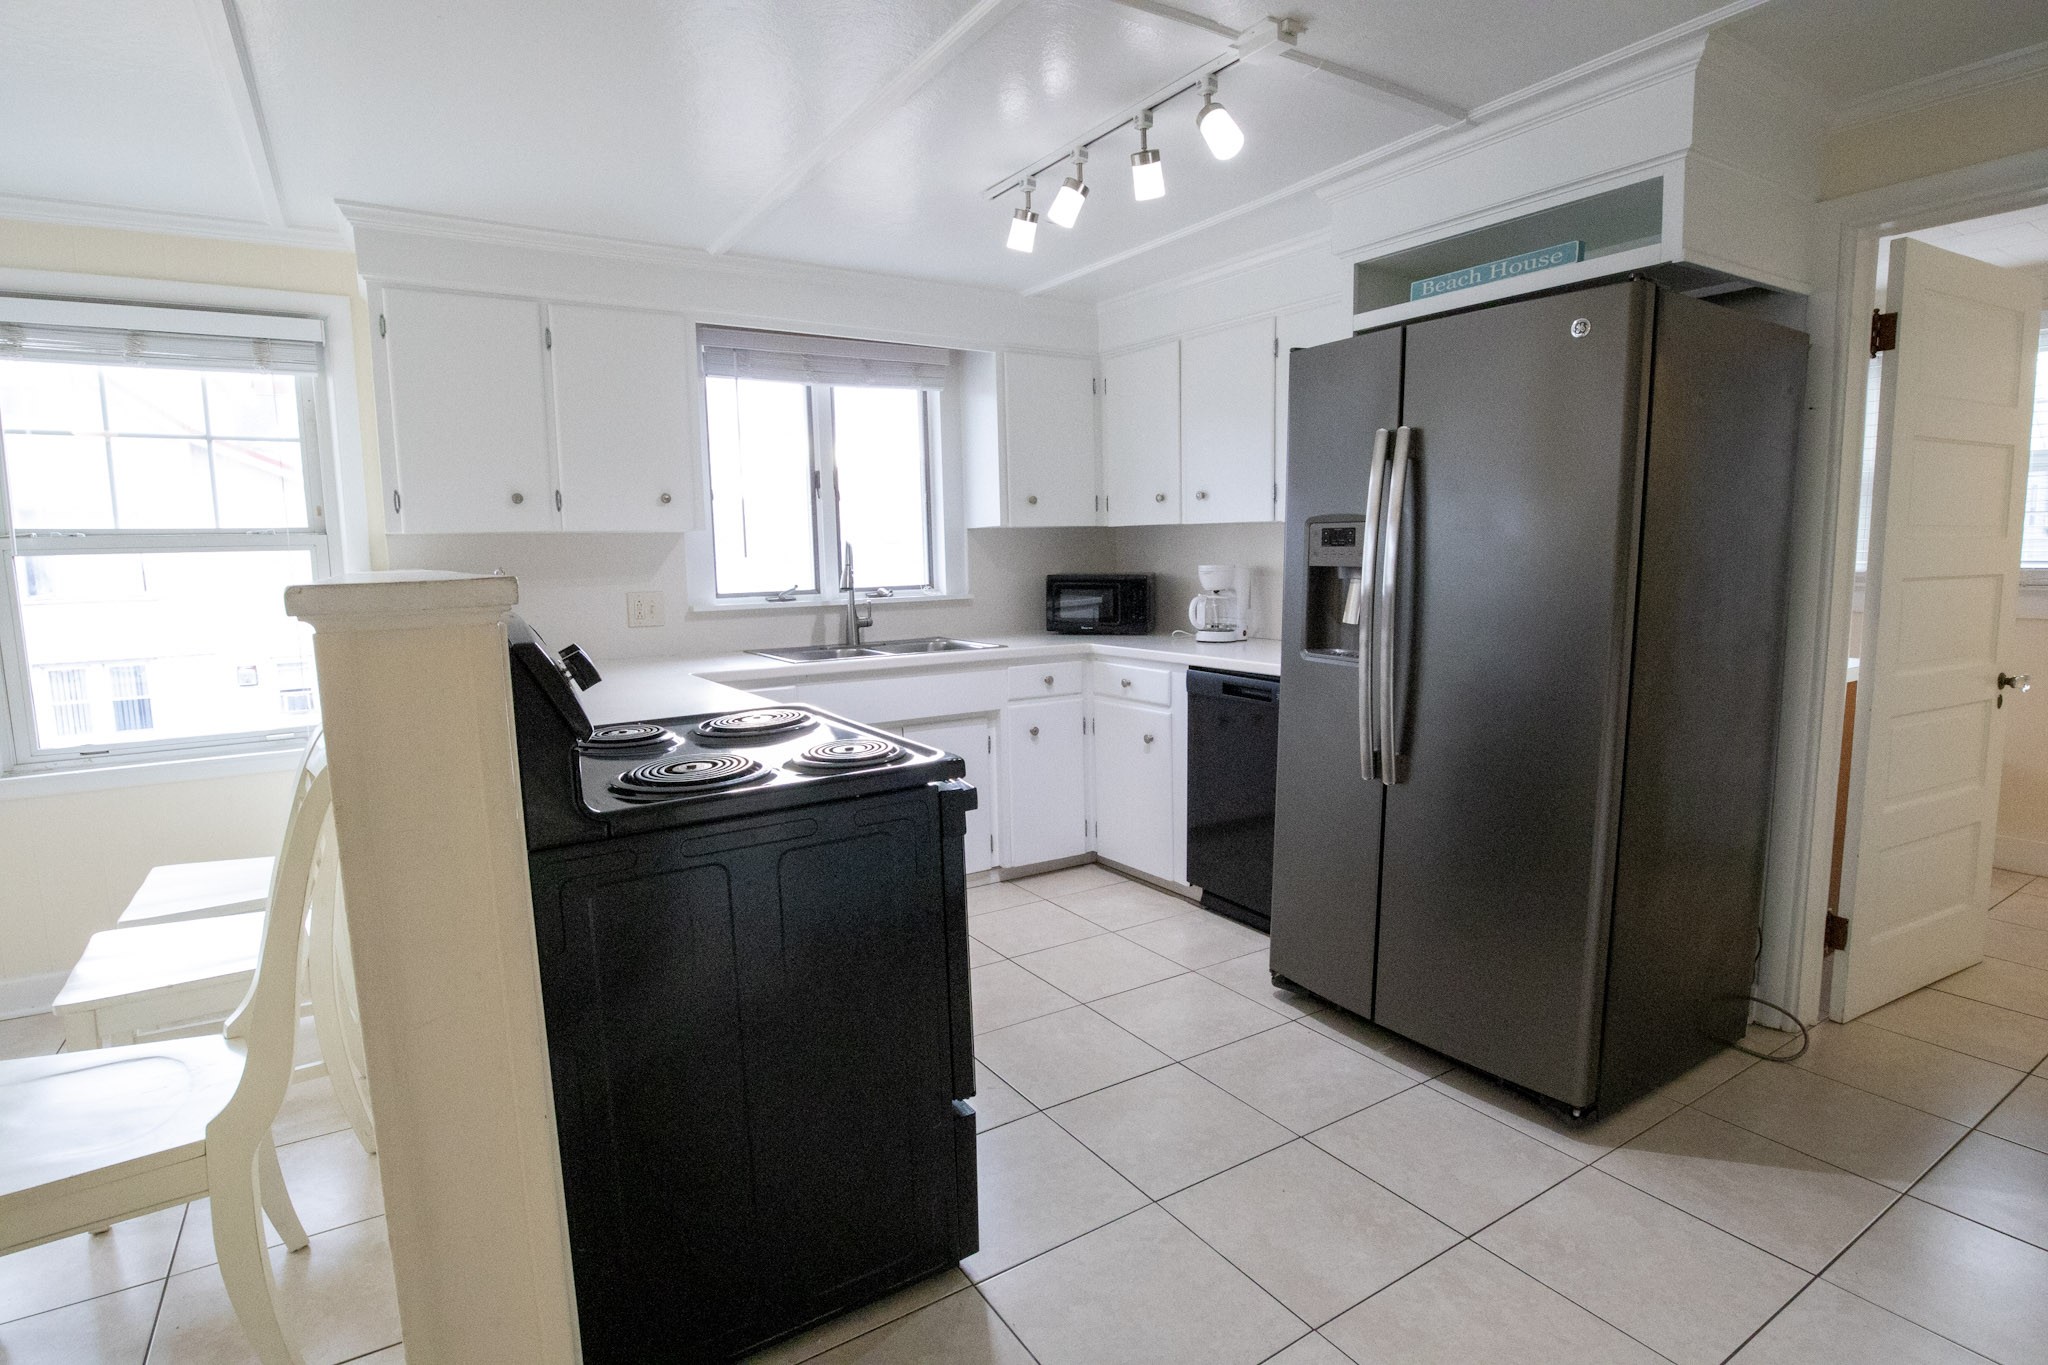 Spacious kitchen with new appliances in the three bedroom apartment at the Majestic Hotel in Ocean City, Maryland